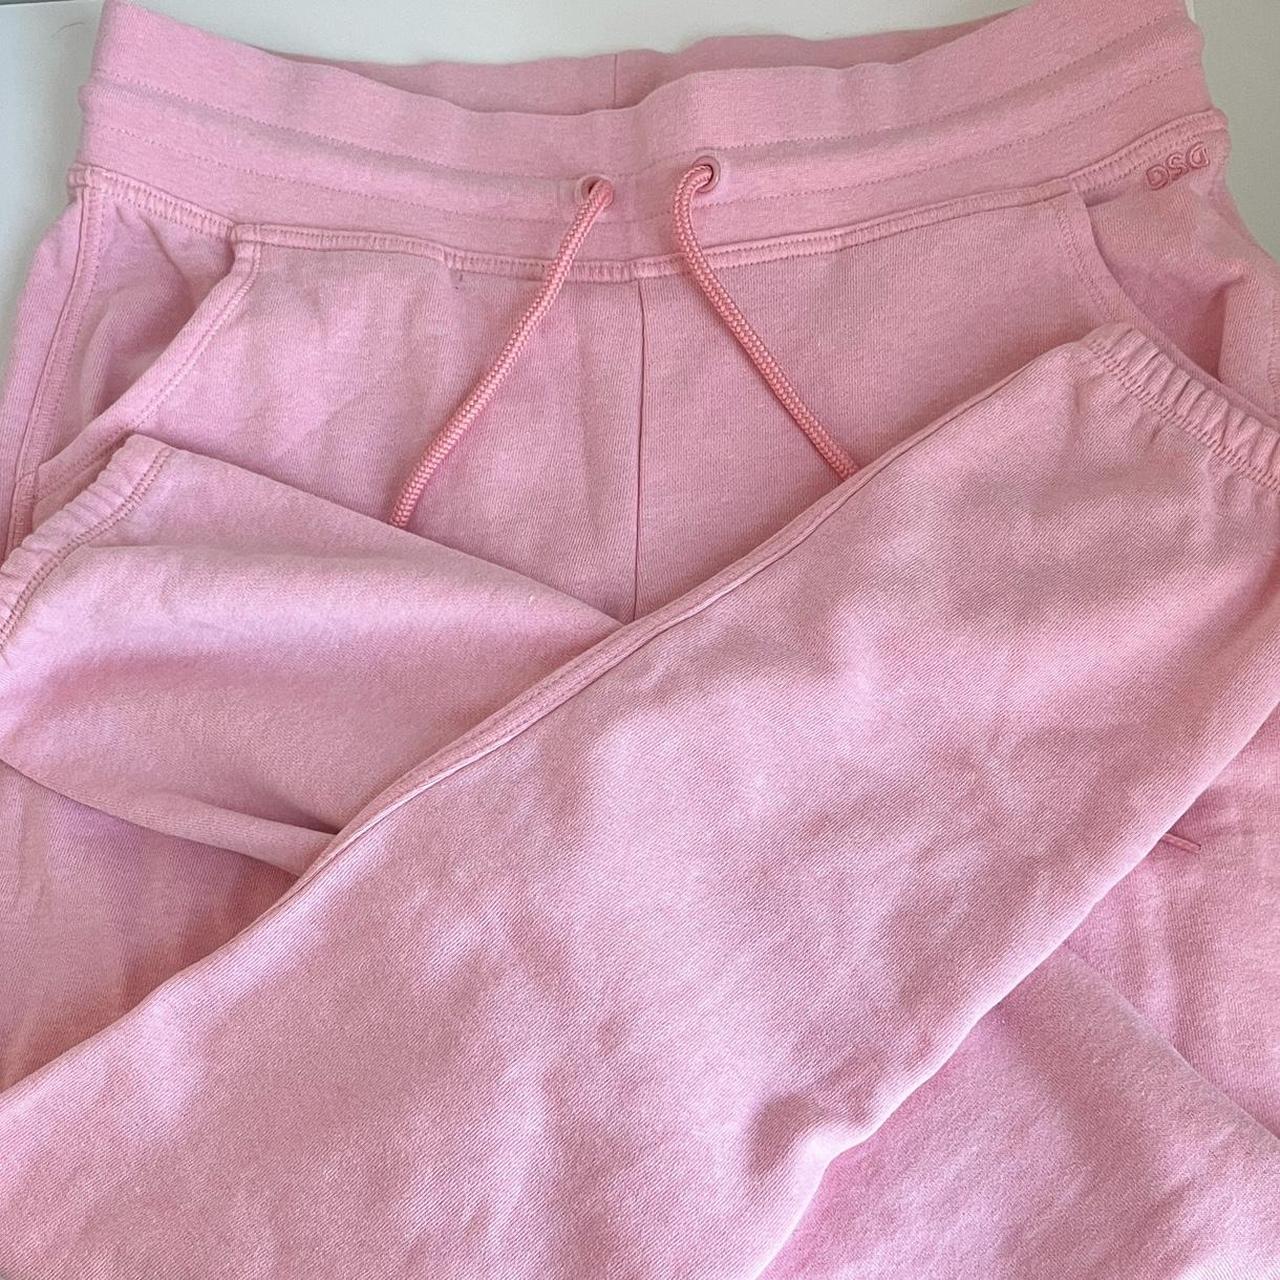 Wild Fable Pastel Checkered Sweatpants Joggers Pink - Depop